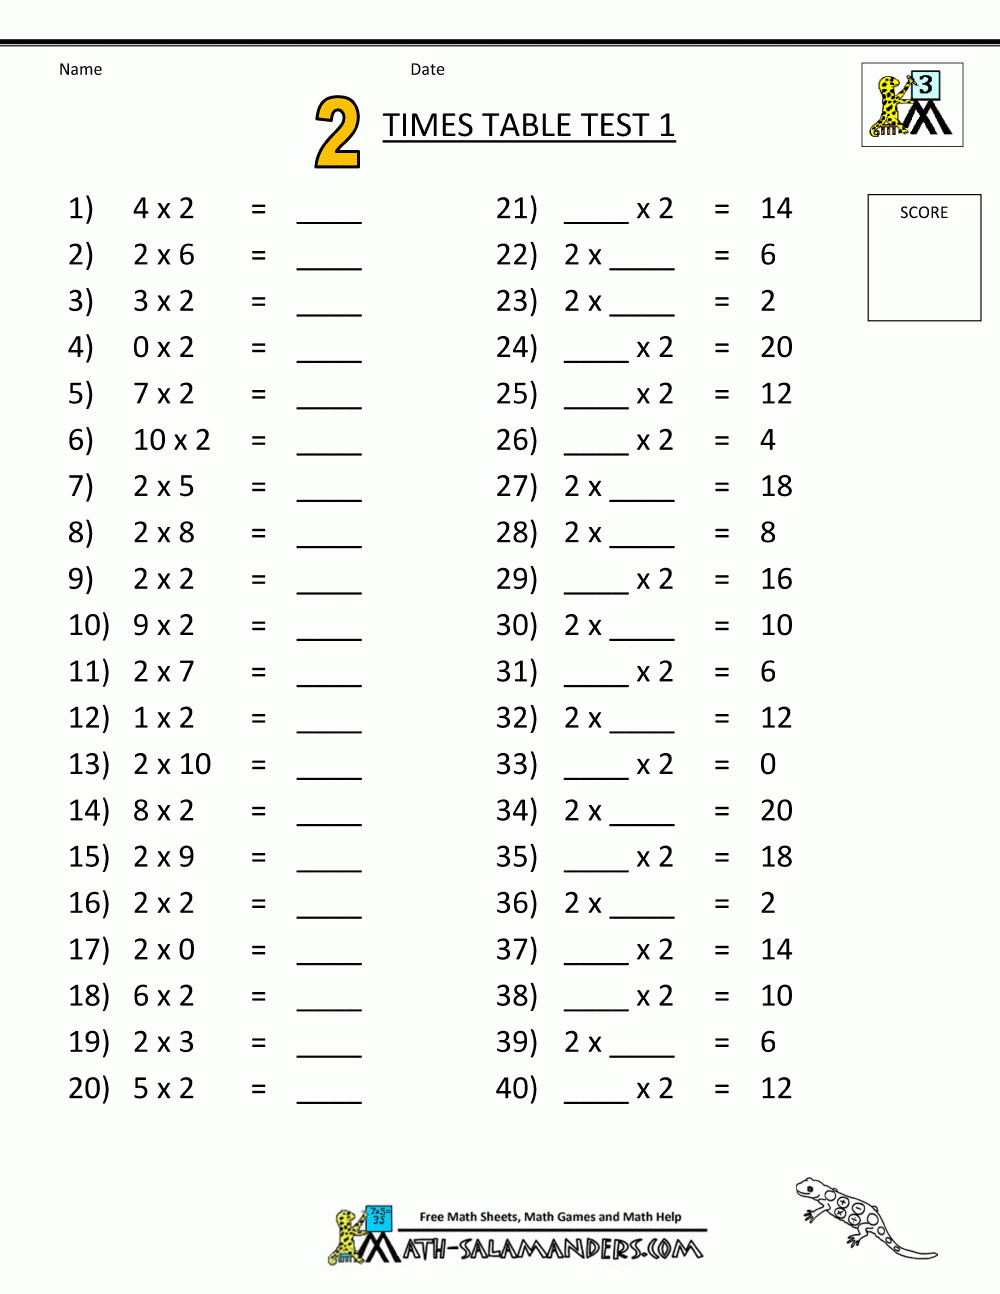 Times Table Tests - 2 3 4 5 10 Times Tables within Multiplication Worksheets X2 X5 X10